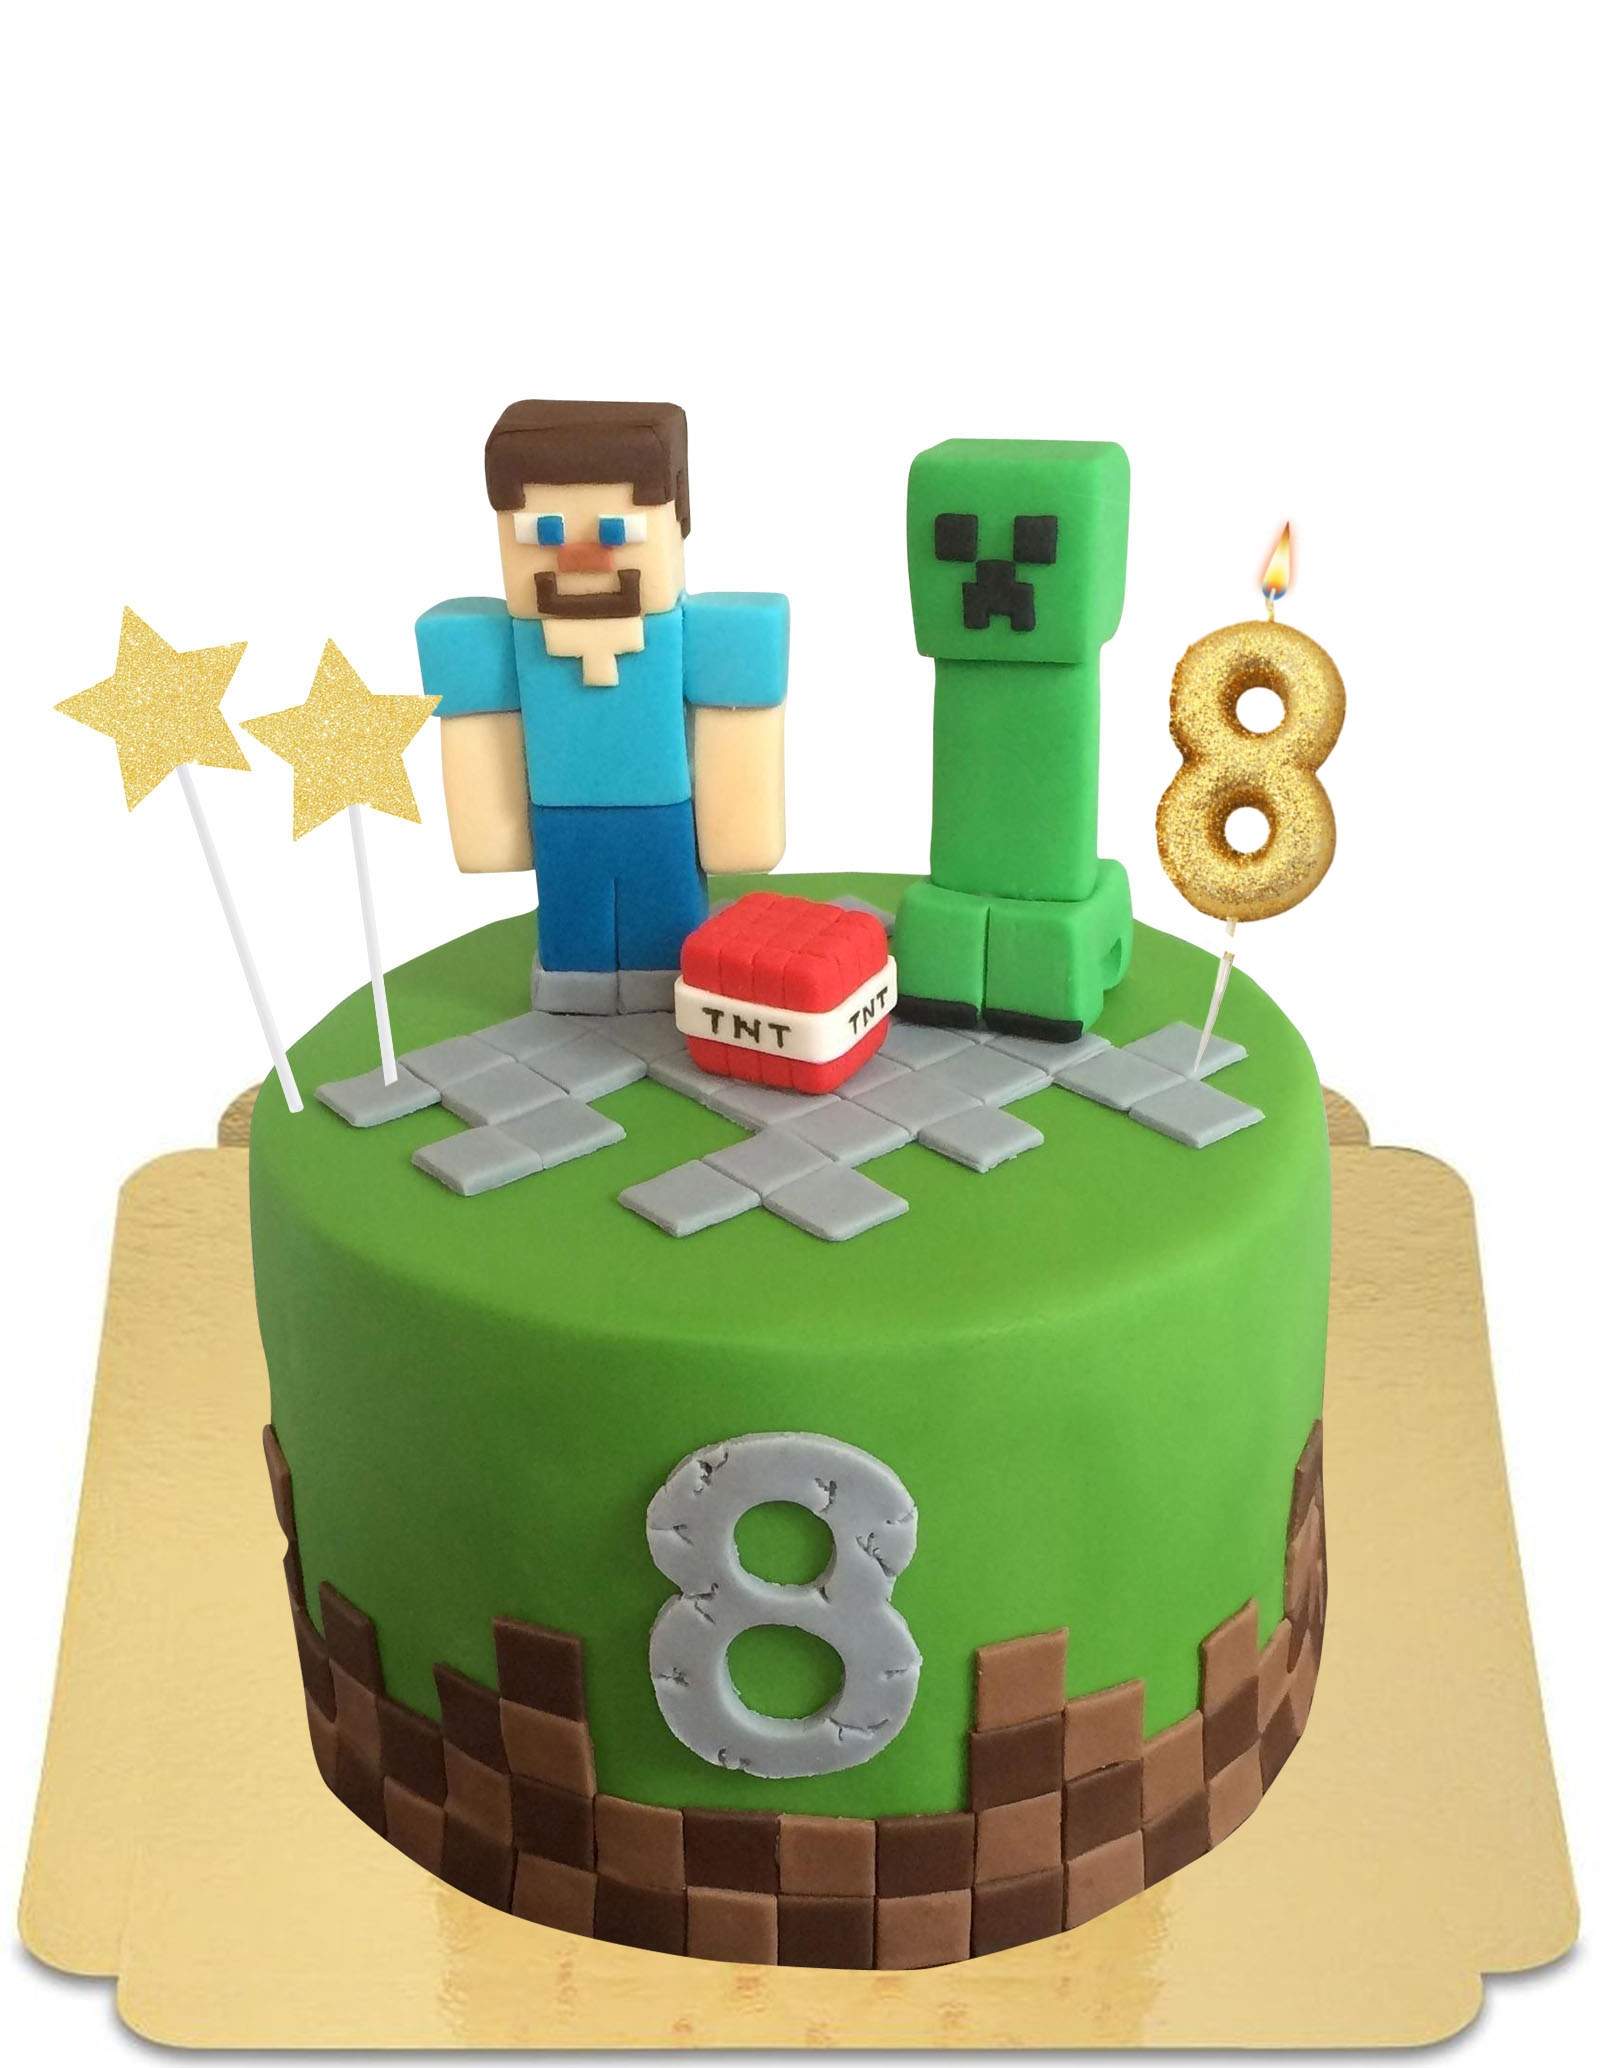 Minecraft Cake | Mini Cakes| Delicious Cake Delivery in KL & Selangor |  Artisan Cakes | French Cakes & Pastry | Designer Cakes | Chocolate Pinata |  Macaron | Flowers & Balloon | Gifts